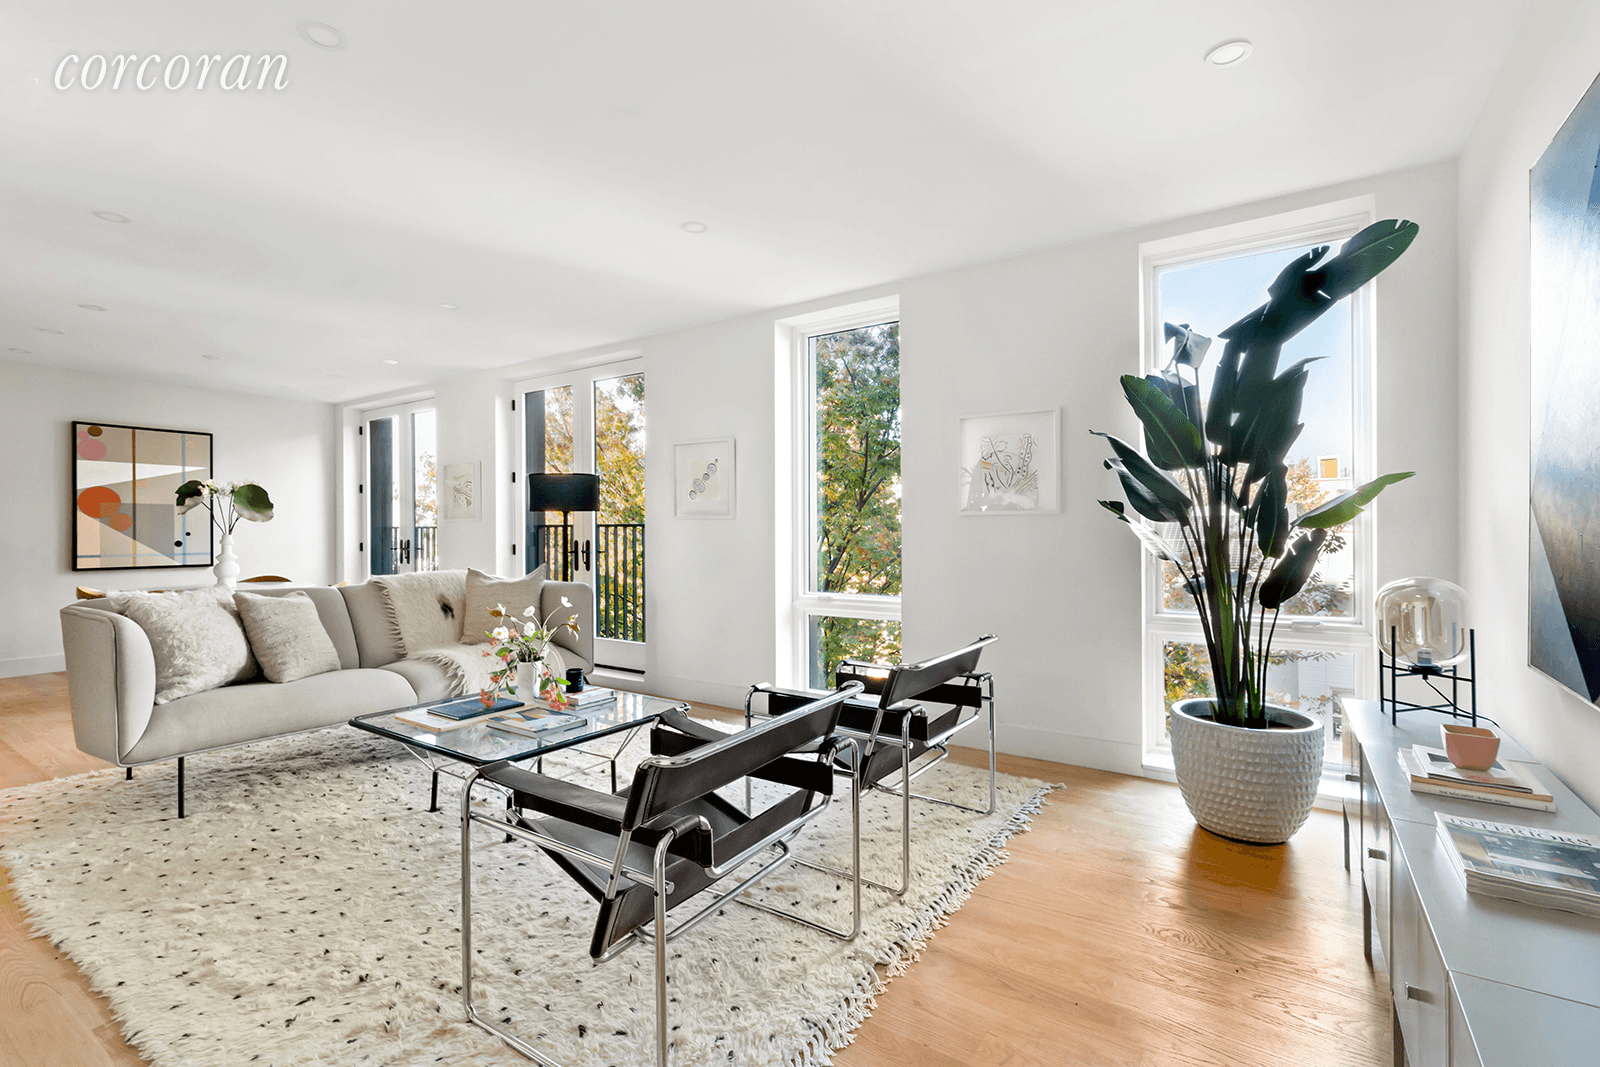 VIRTUAL TOUR AVAILABLE. It's the new Park Slope !